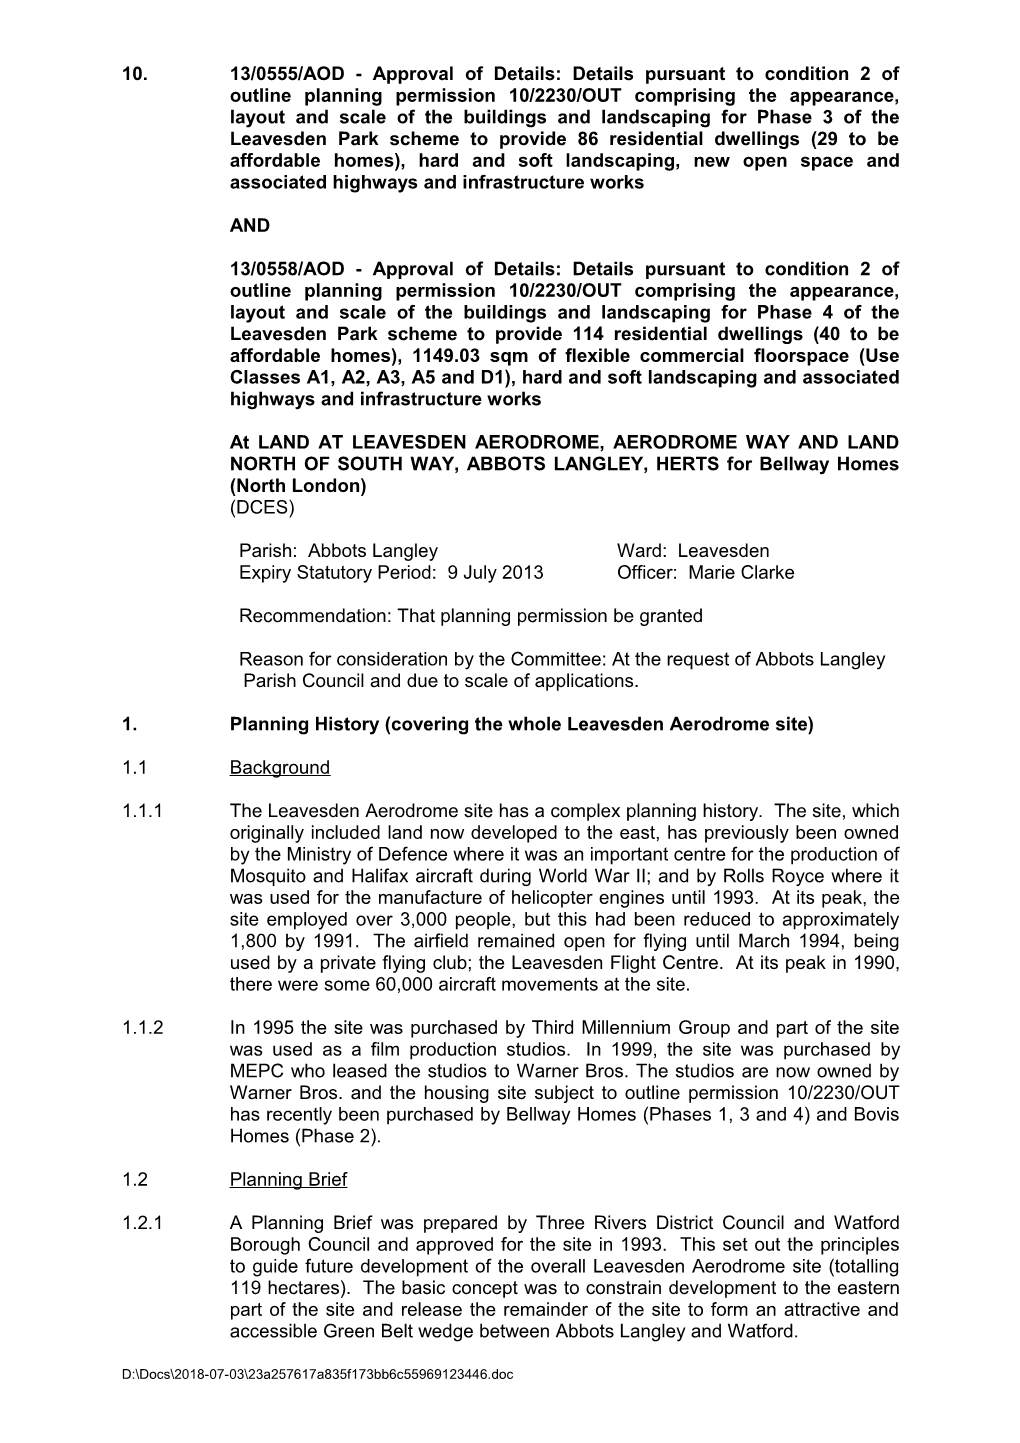 Report: Planning Cttee 22.11.12: Part I - (07) 12 1213 Aod and 12 1214 Aod - Land at Leavesden